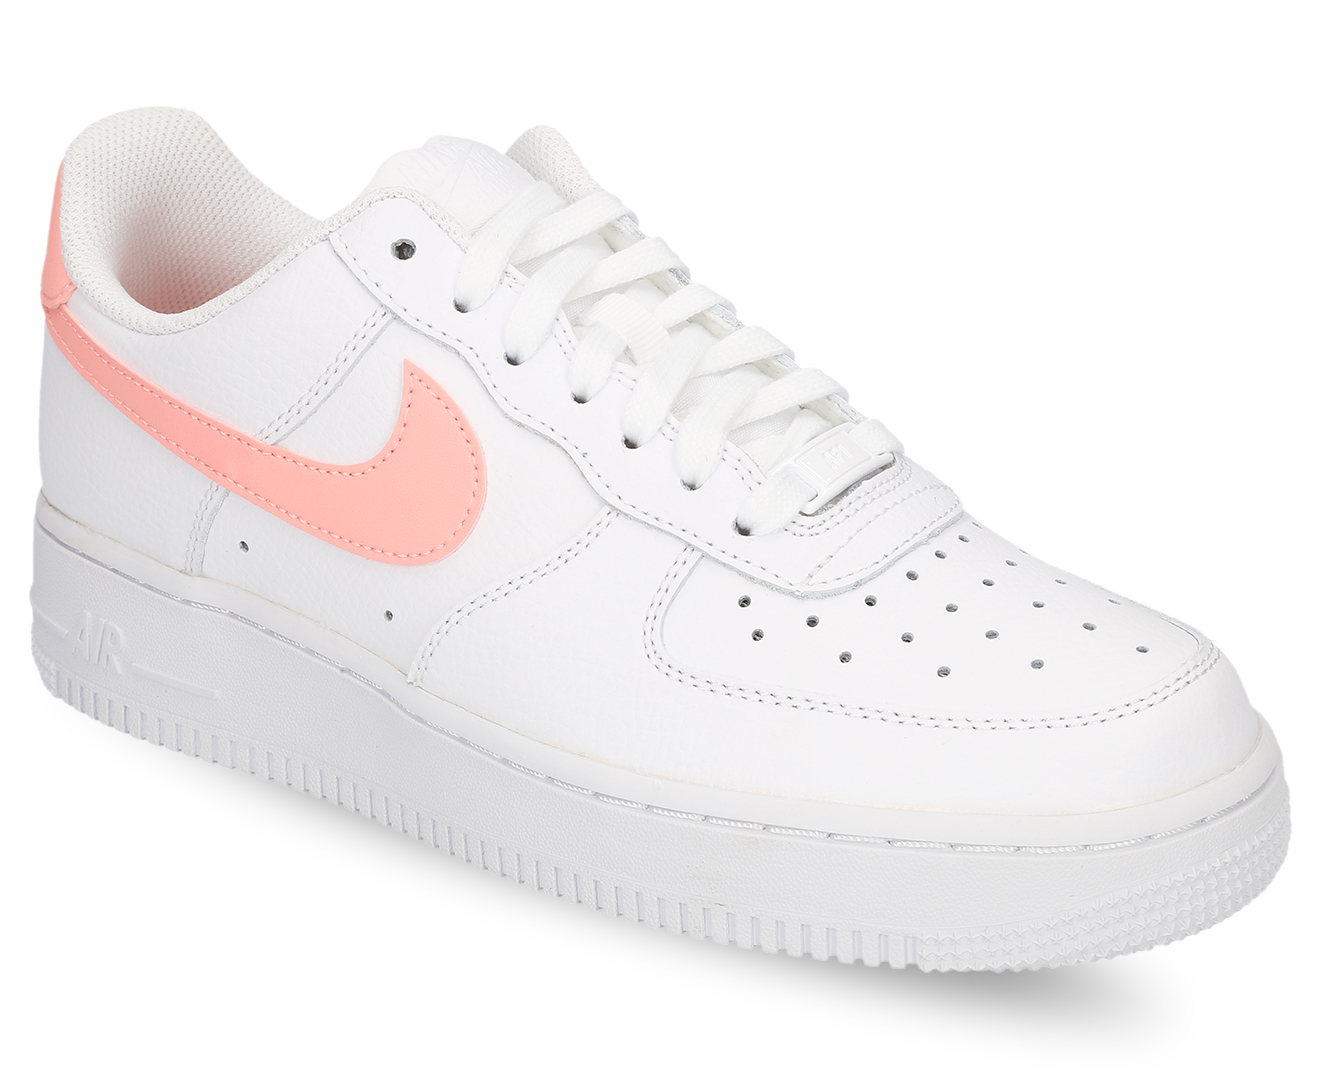 Nike Women's Air Force 1 '07 Shoe - White/Oracle Pink-White | Catch.co.nz